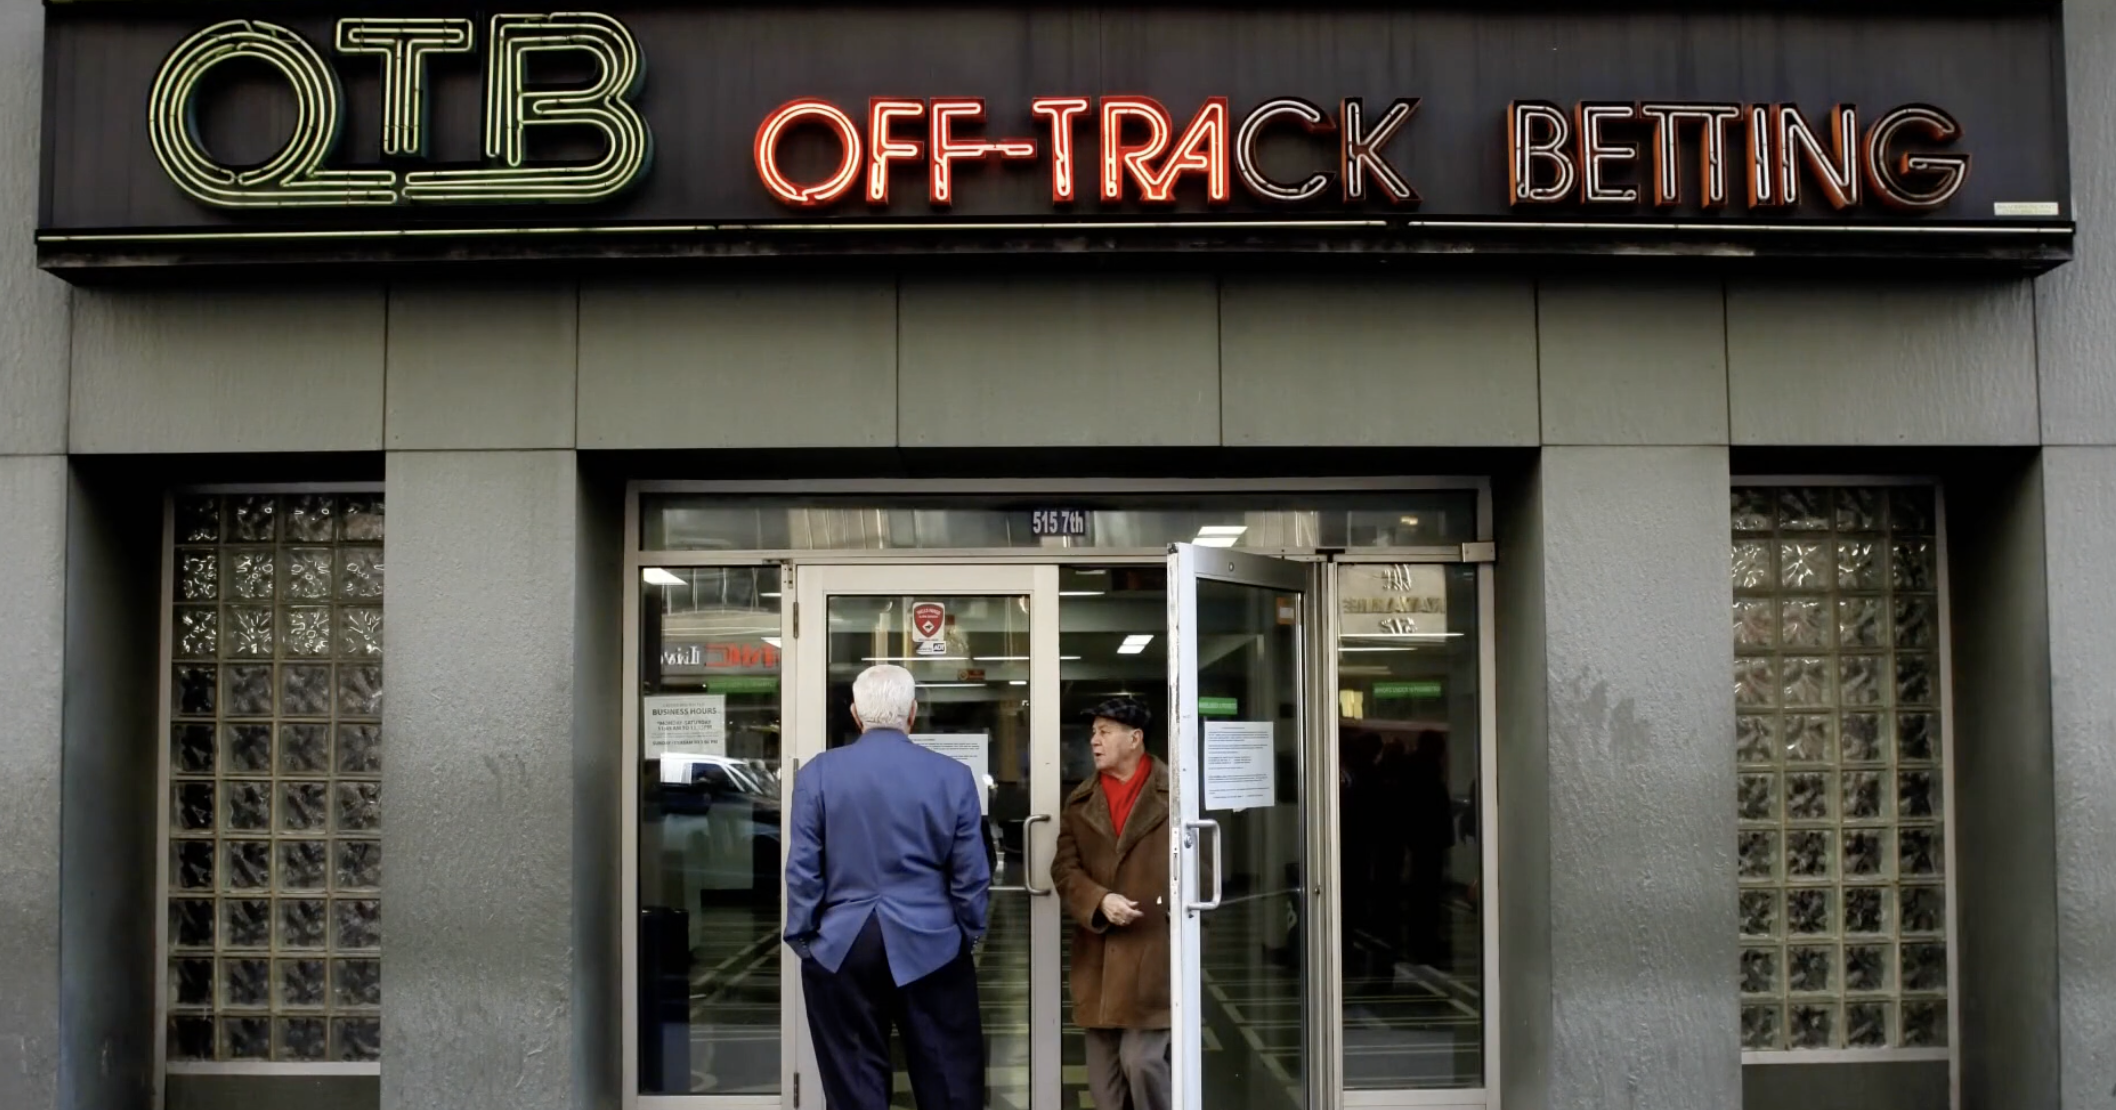 off track betting